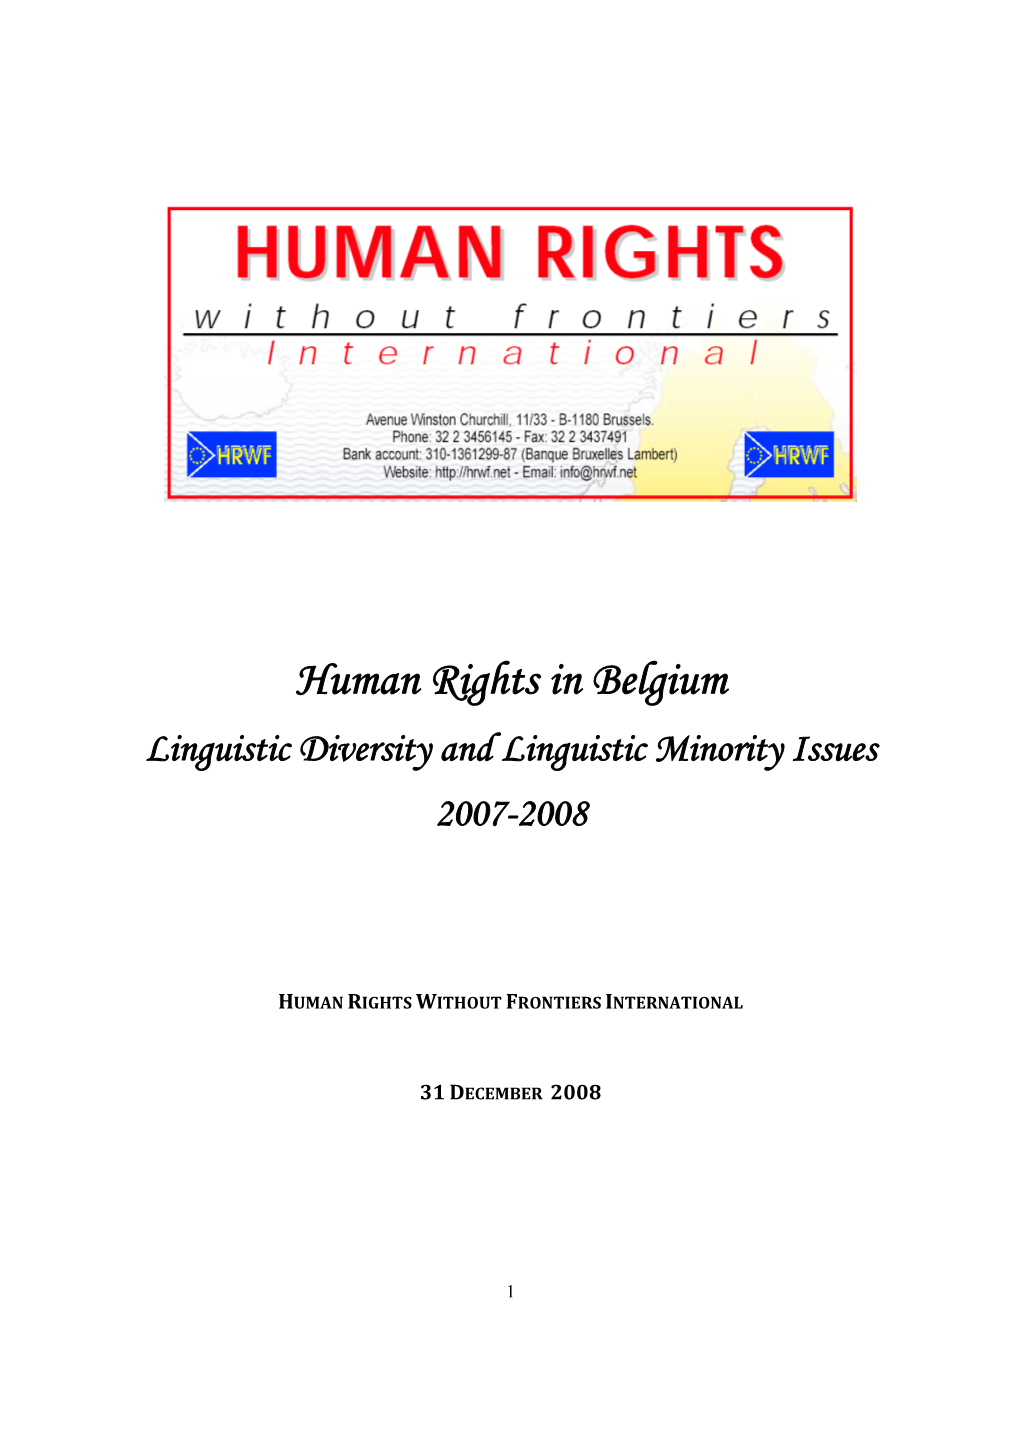 Human Rights in Belgium Linguistic Diversity and Linguistic Minority Issues 2007-2008